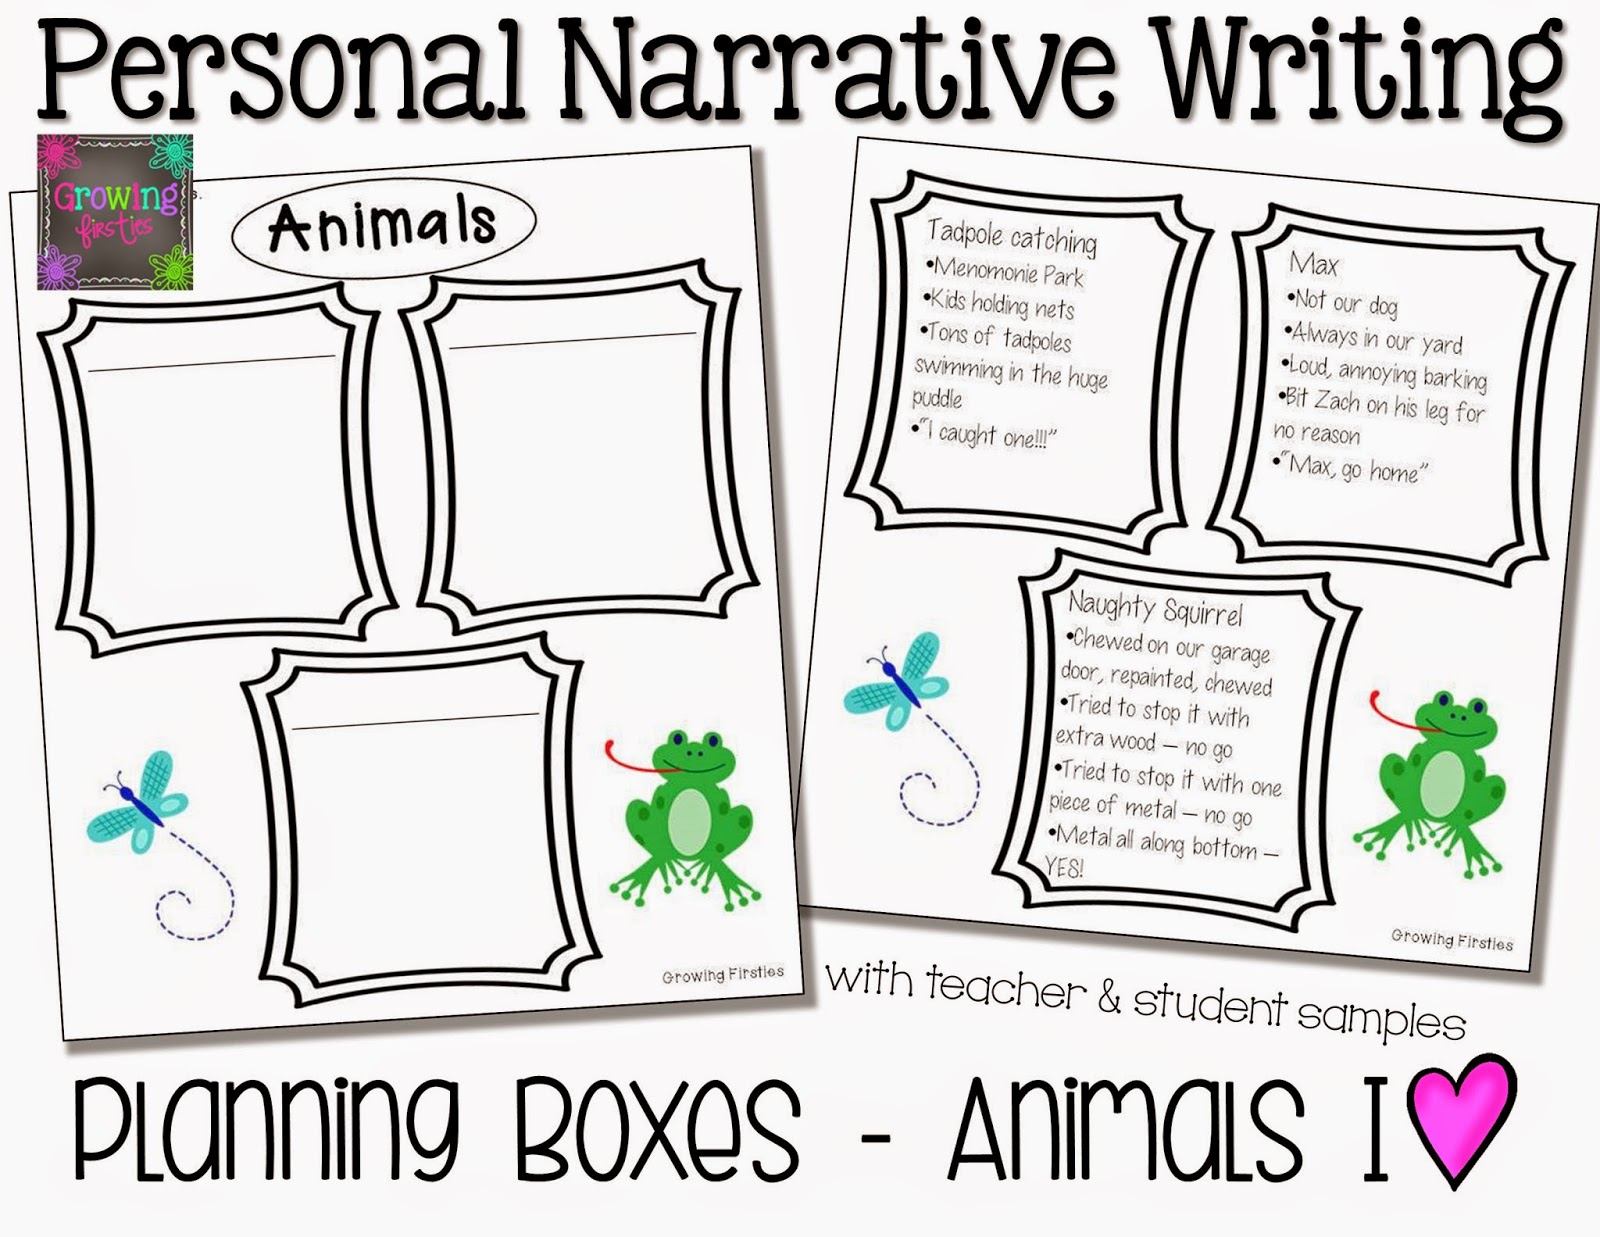 Personal Narrative Writing Workshop Unit  Growing Firsties